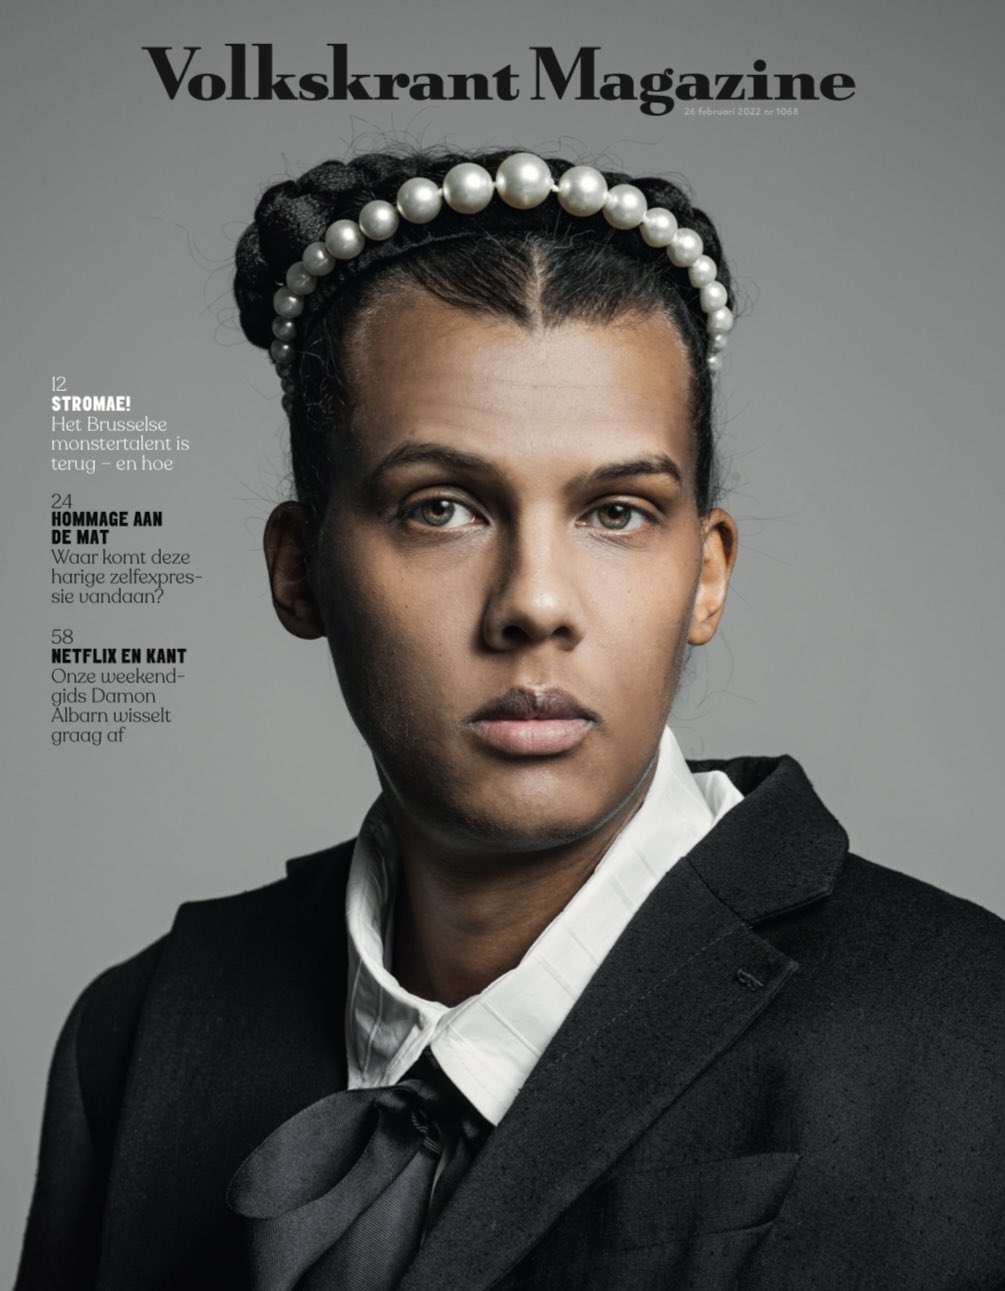 coverjunkie on X: An iconic @Stromae ♠️ Its the new cover @Volkskrant  Magazine, photo from fabulous @RobinDePuy #stromae   / X